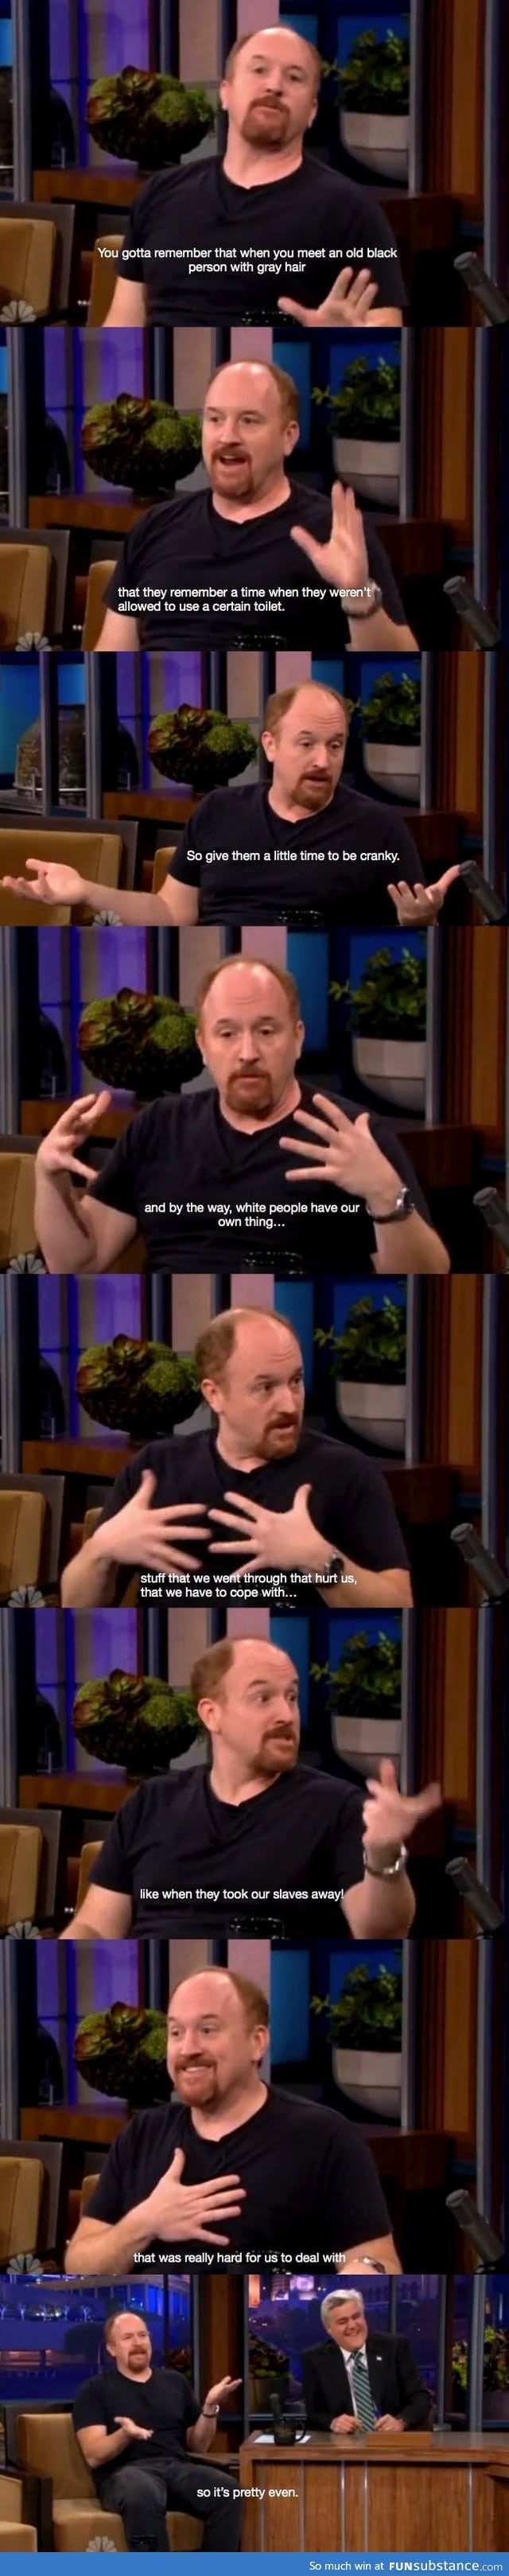 Louis CK, one of the few men that can be racist and get away with it